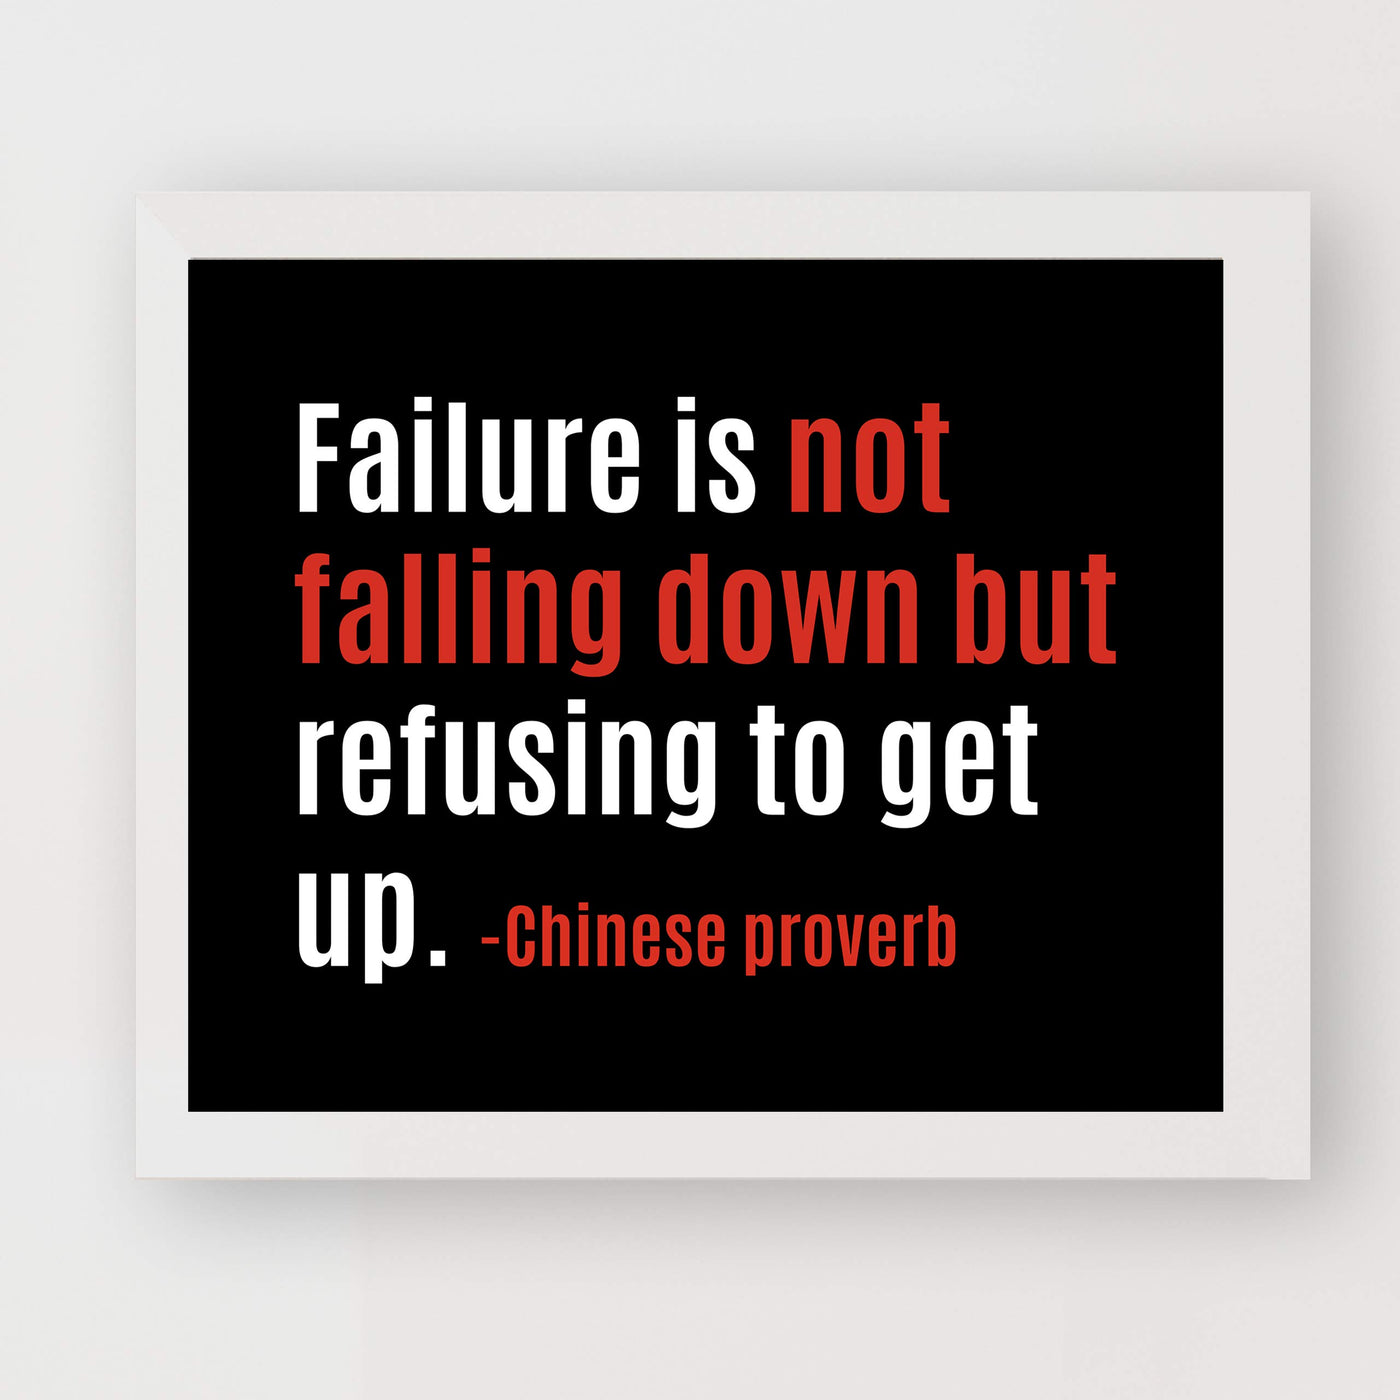 Failure-Not Falling Down But Refusing to Get Up Motivational Quotes Wall Art -10 x 8" Poster Print-Ready to Frame. Inspirational Home-Office-School-Gym-Locker Room Decor. Great Gift of Motivation!